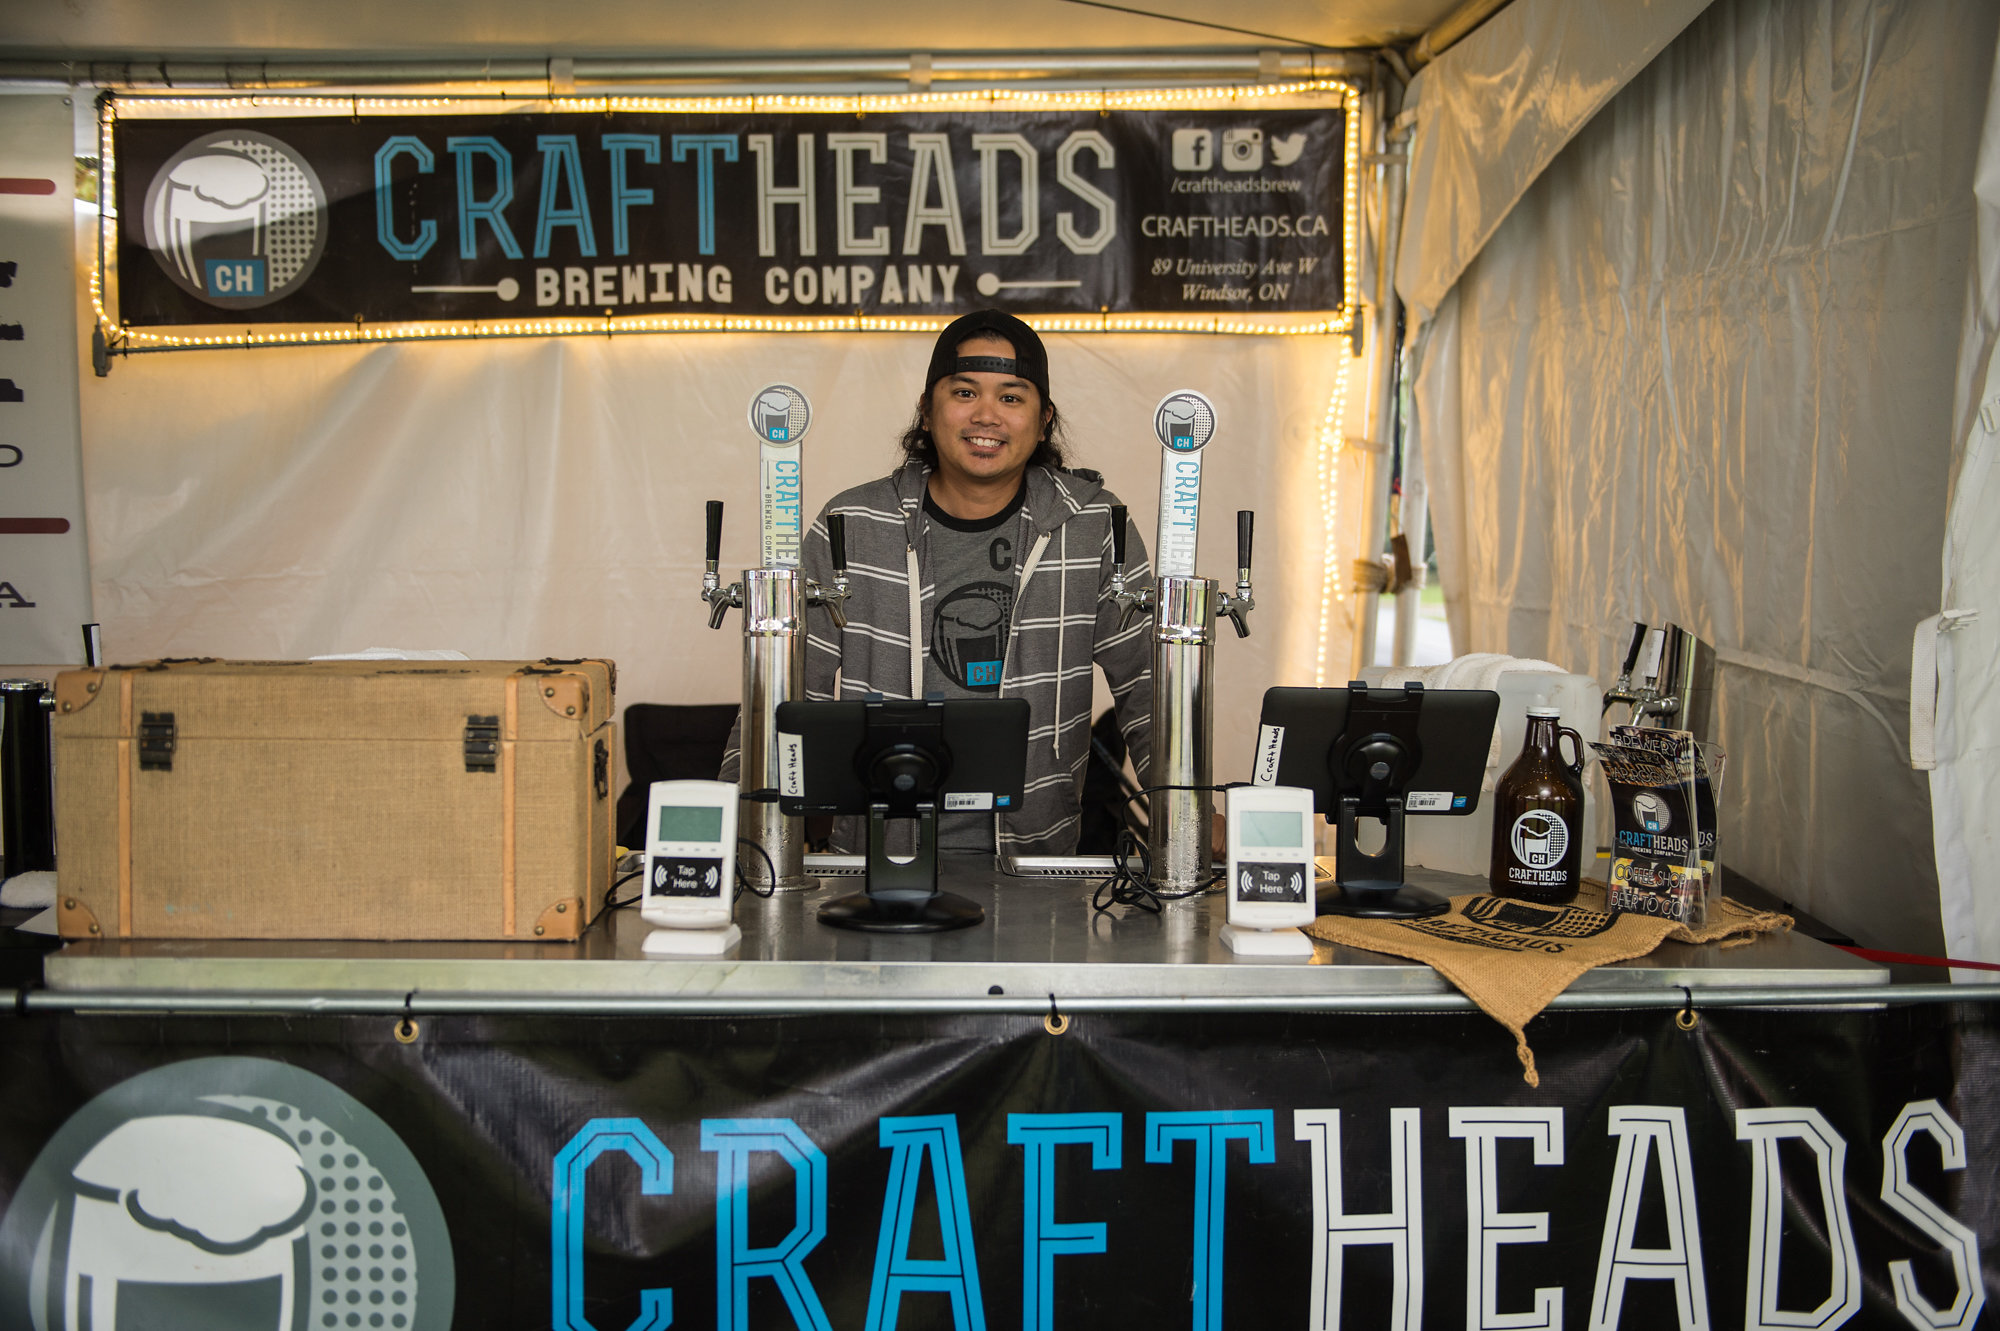 Bryan Datoc of Craft Heads Brewing Co. at the 2017 Windsor Craft Beer Festival.